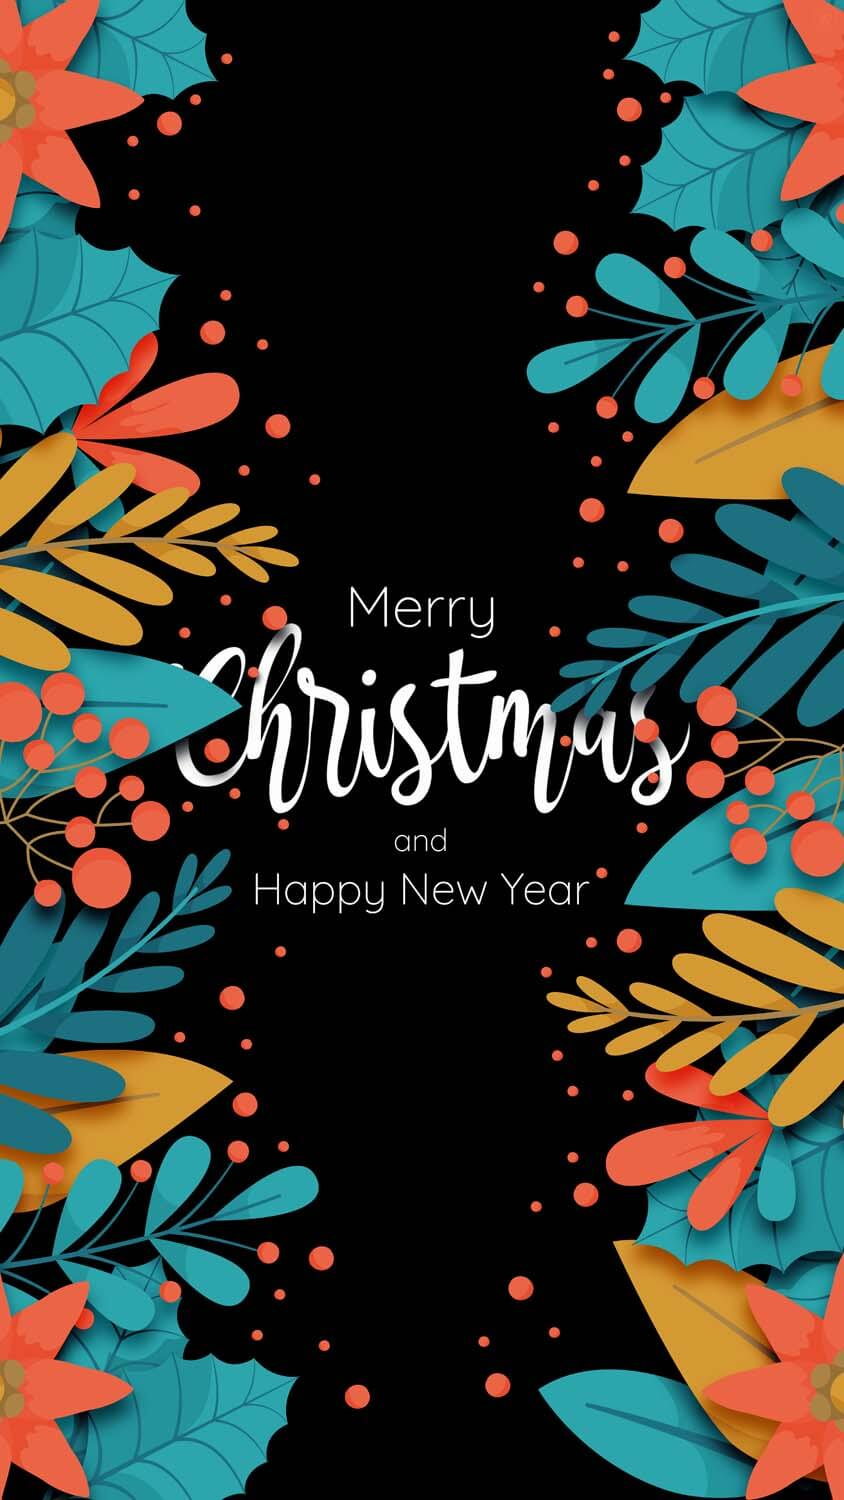 Merry Christmas And Happy New Year IPhone Wallpaper HD  IPhone Wallpapers